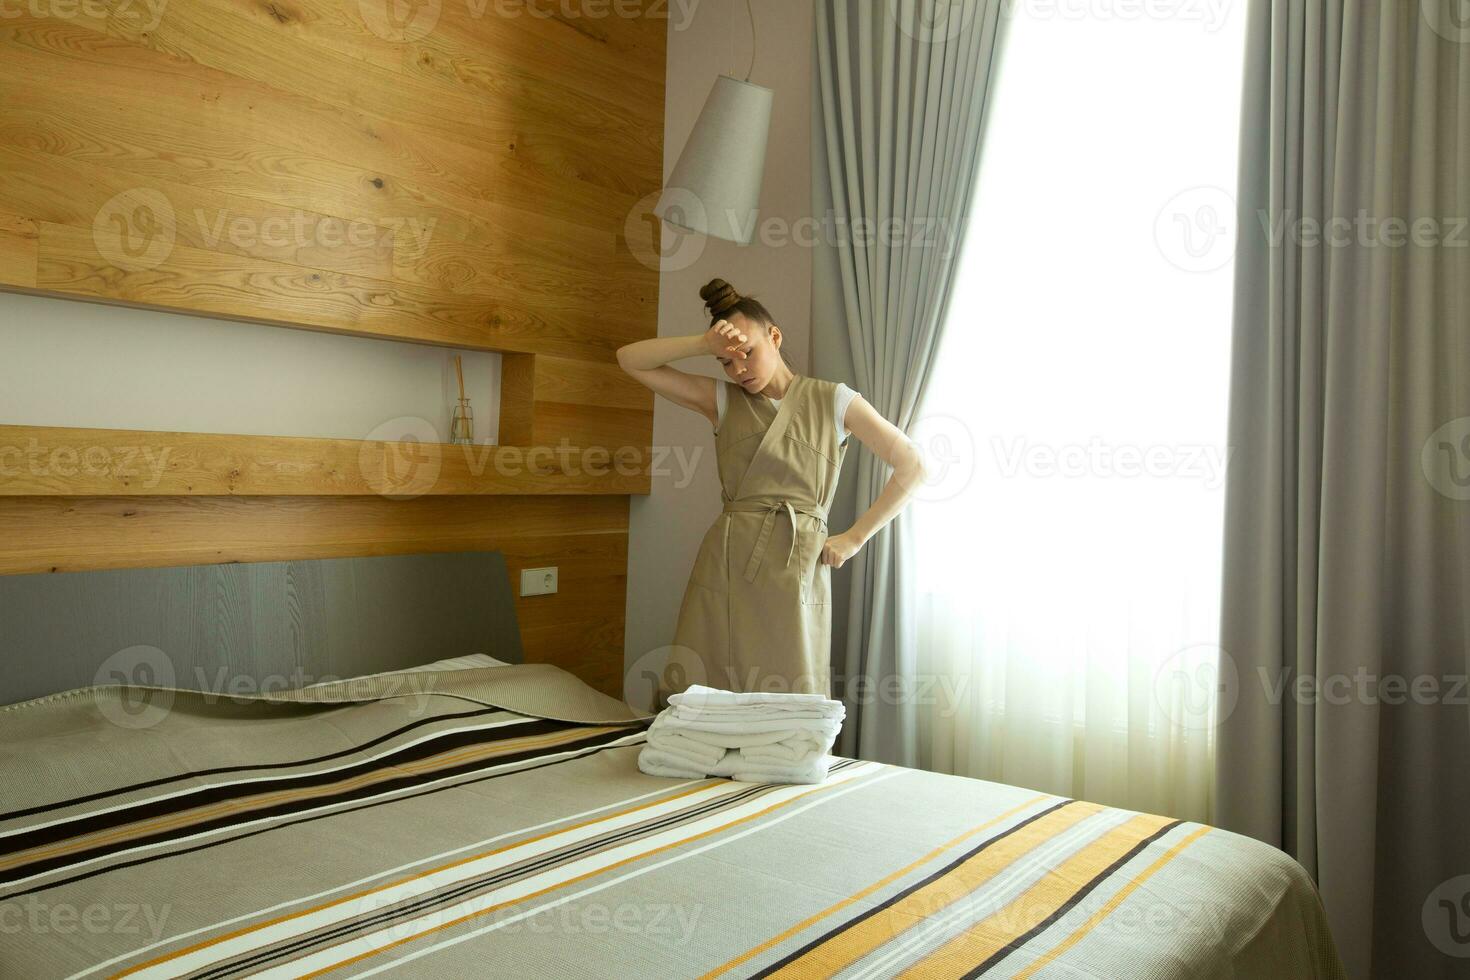 a woman standing in front of a bed photo